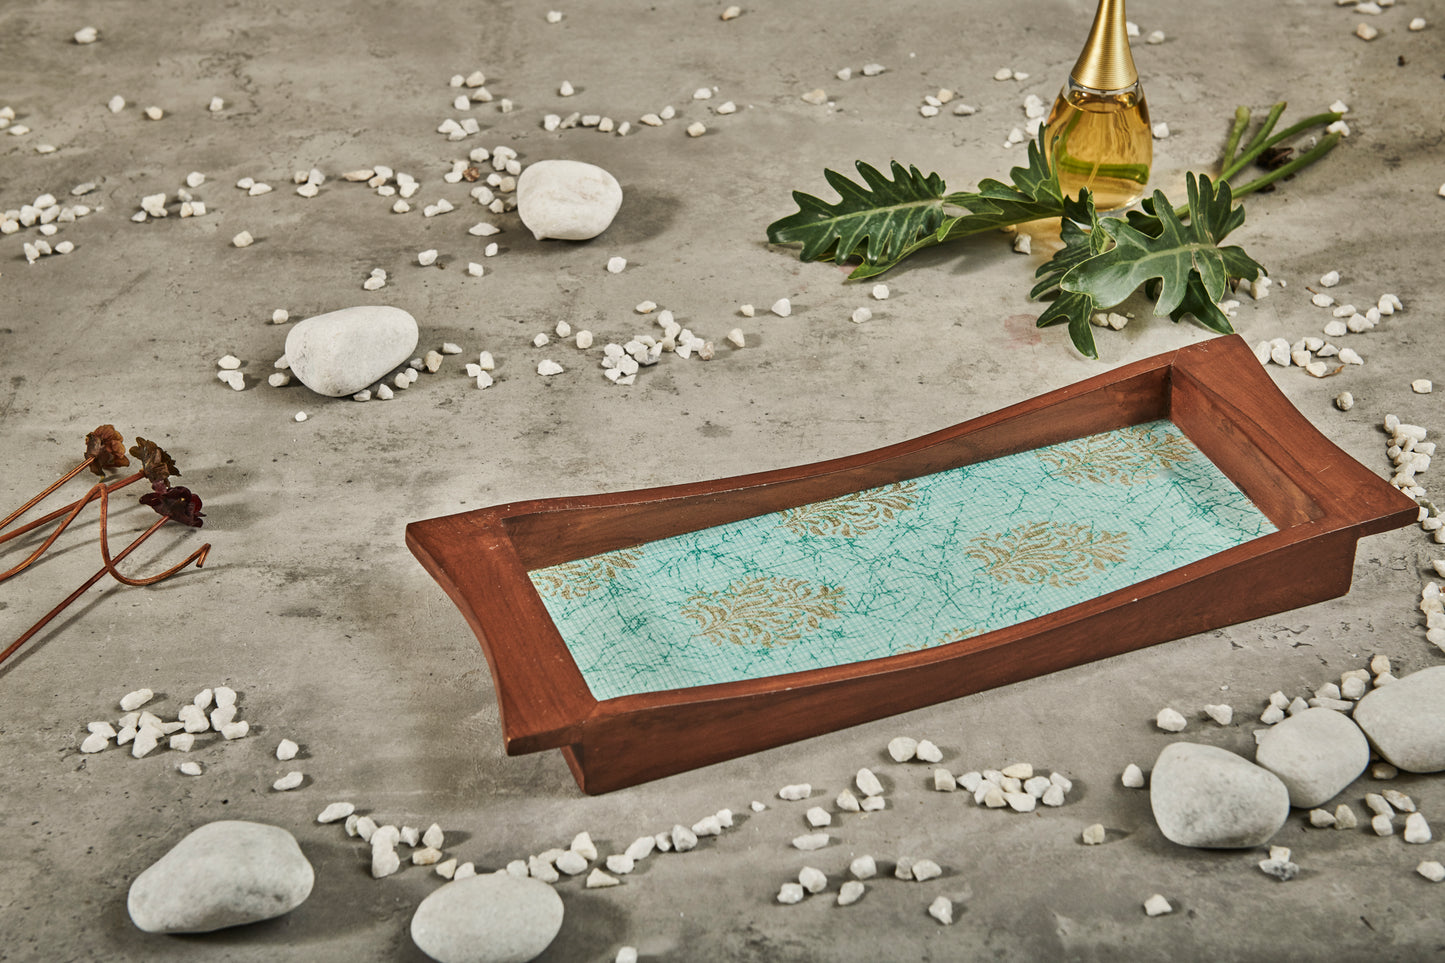 A Tiny Mistake Golden Motifs Pastel Blue Base Boat Shaped Teak Serving Tray, Tray for Serving Tea and Snacks, 35 x 15 x 4 cm